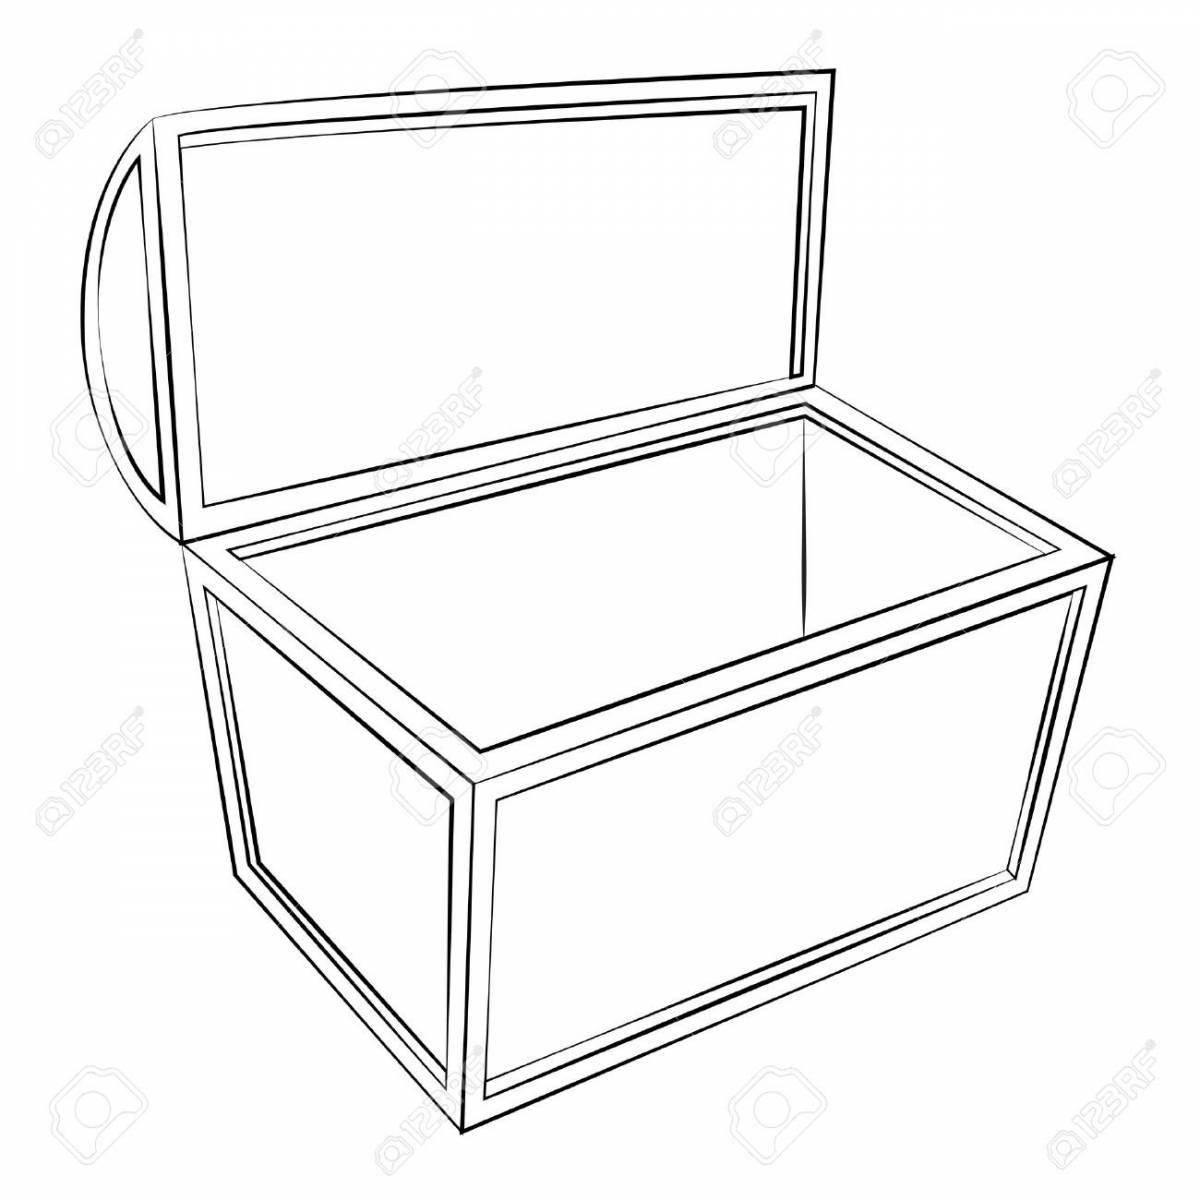 Fascinating jewelry box coloring book for kids